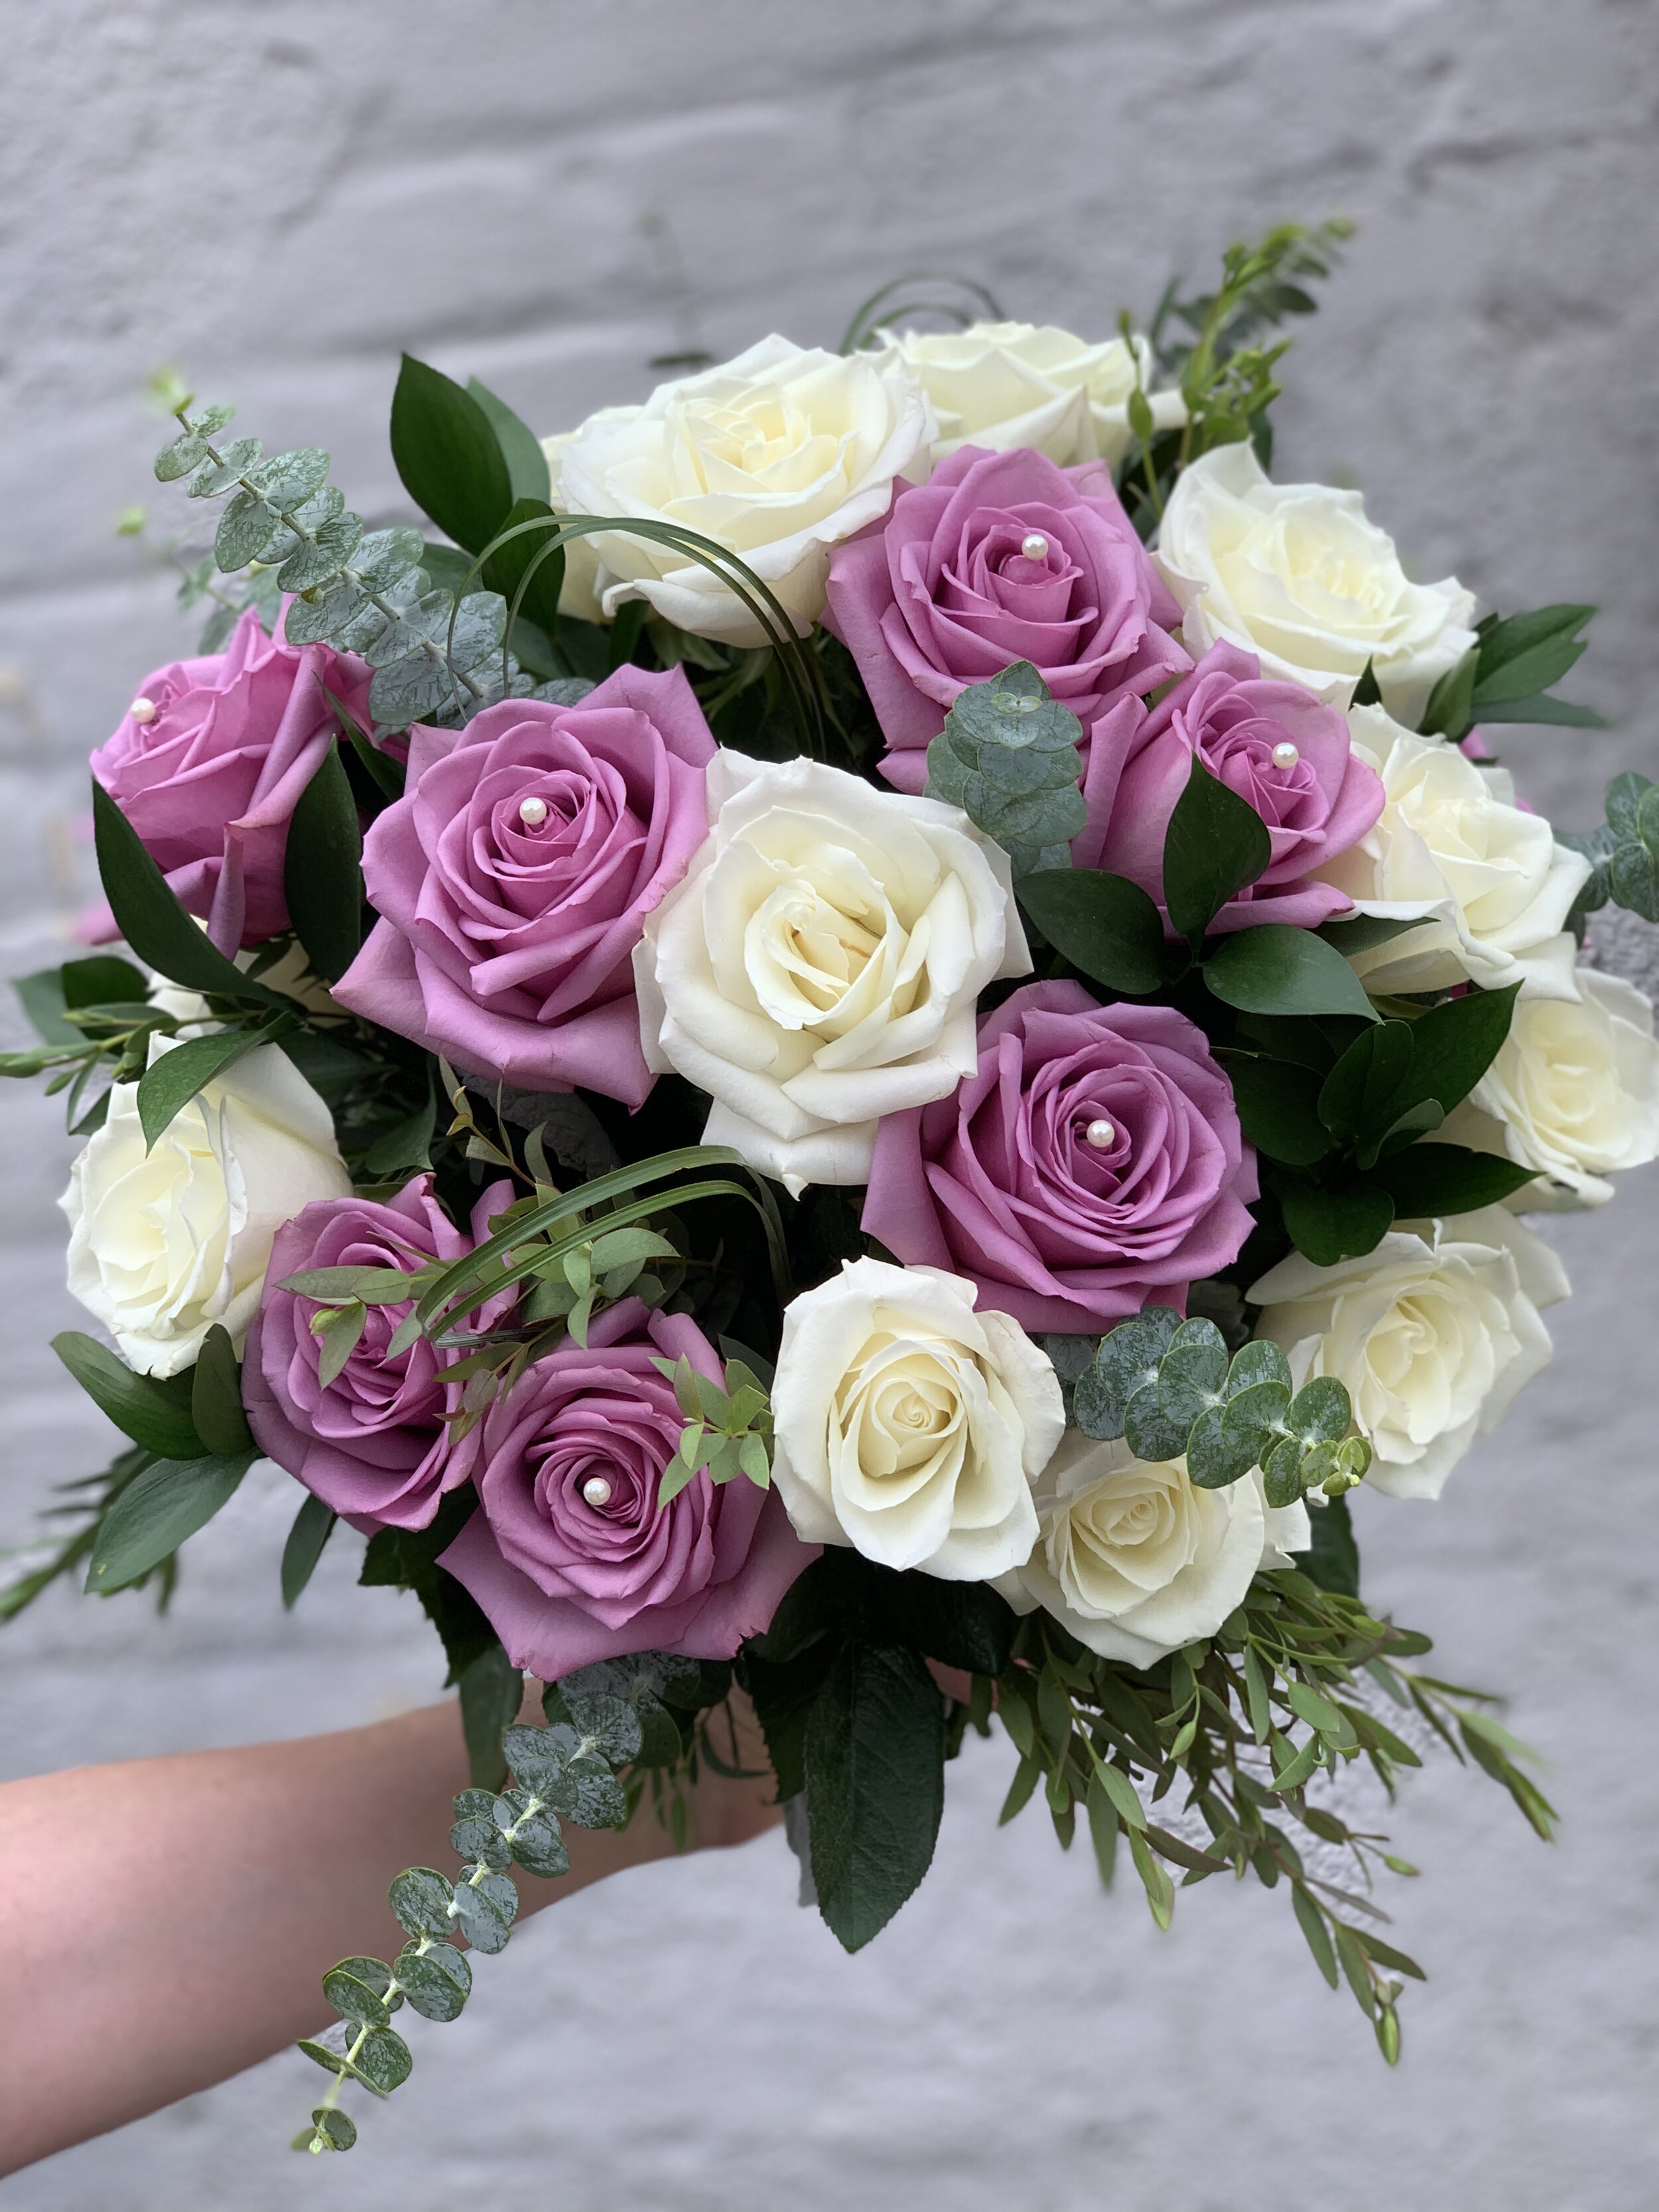 Lavender and White Roses in Handtied Bouquet.jpg